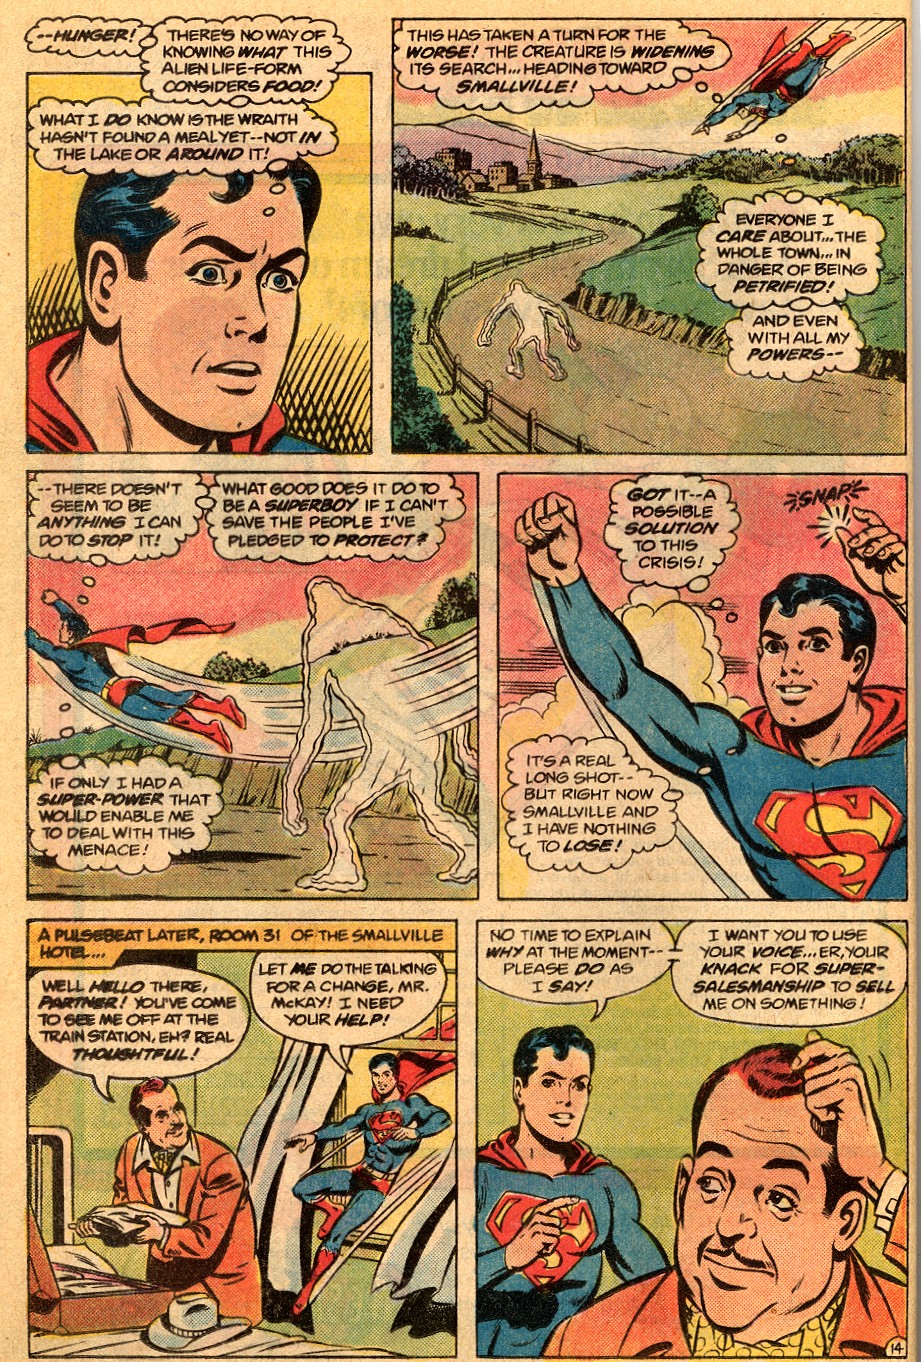 The New Adventures of Superboy 21 Page 19